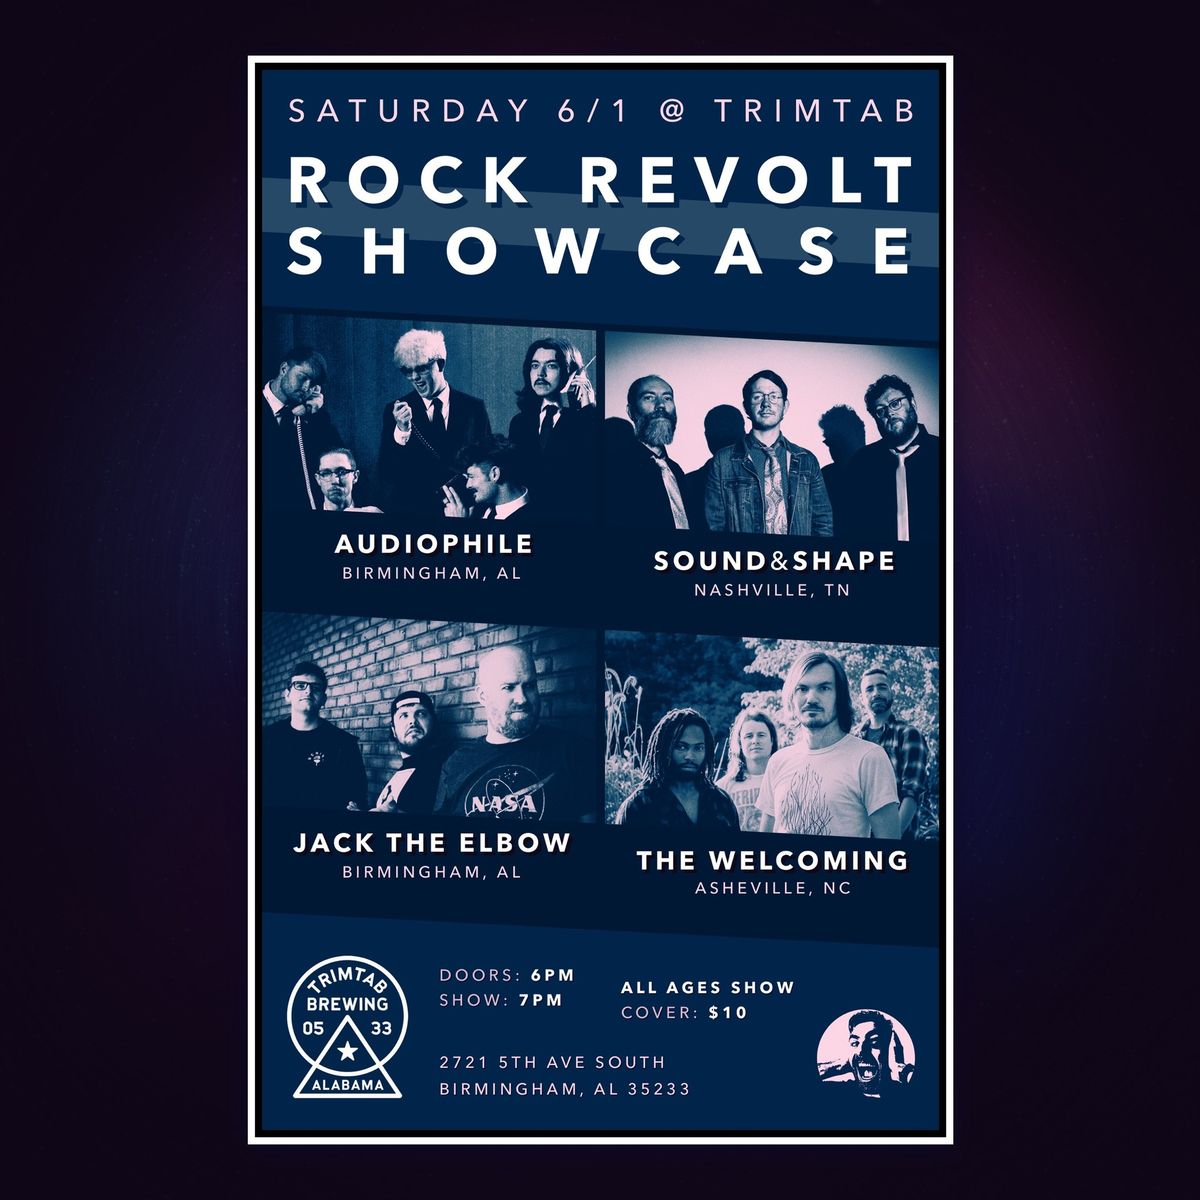 Rock Revolt Showcase @ TrimTab w\/Sound & Shape, The Welcoming, Audiophile, Jack The Elbow